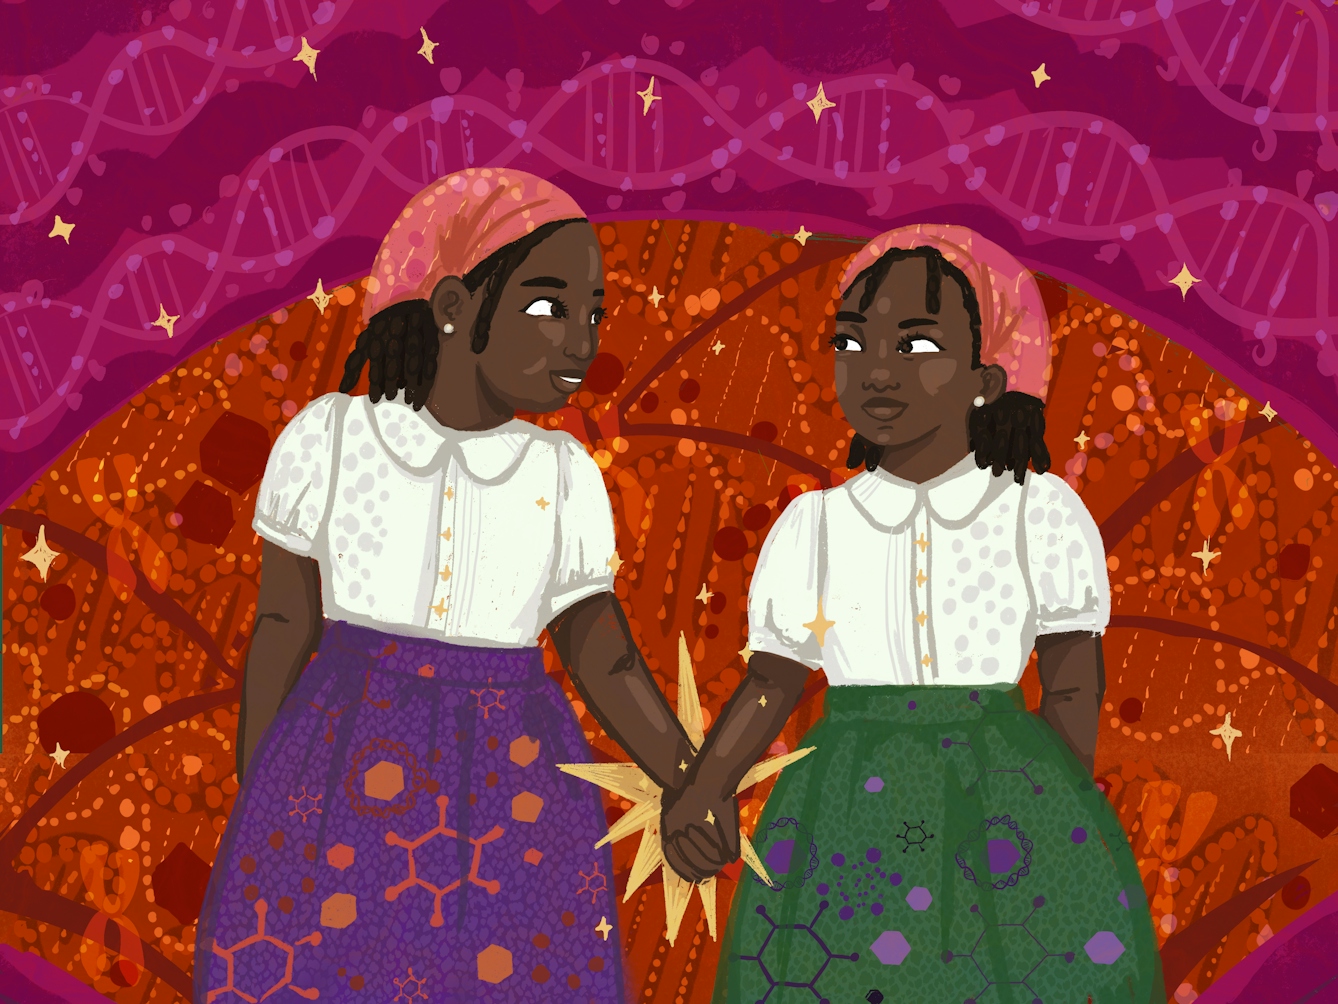 An illustration of two young black girls looking at each other while holding hands. Both are wearing head scarves and skirts with patterns of biological cells and structures. In the background are representations of DNA strands and chromosomes.